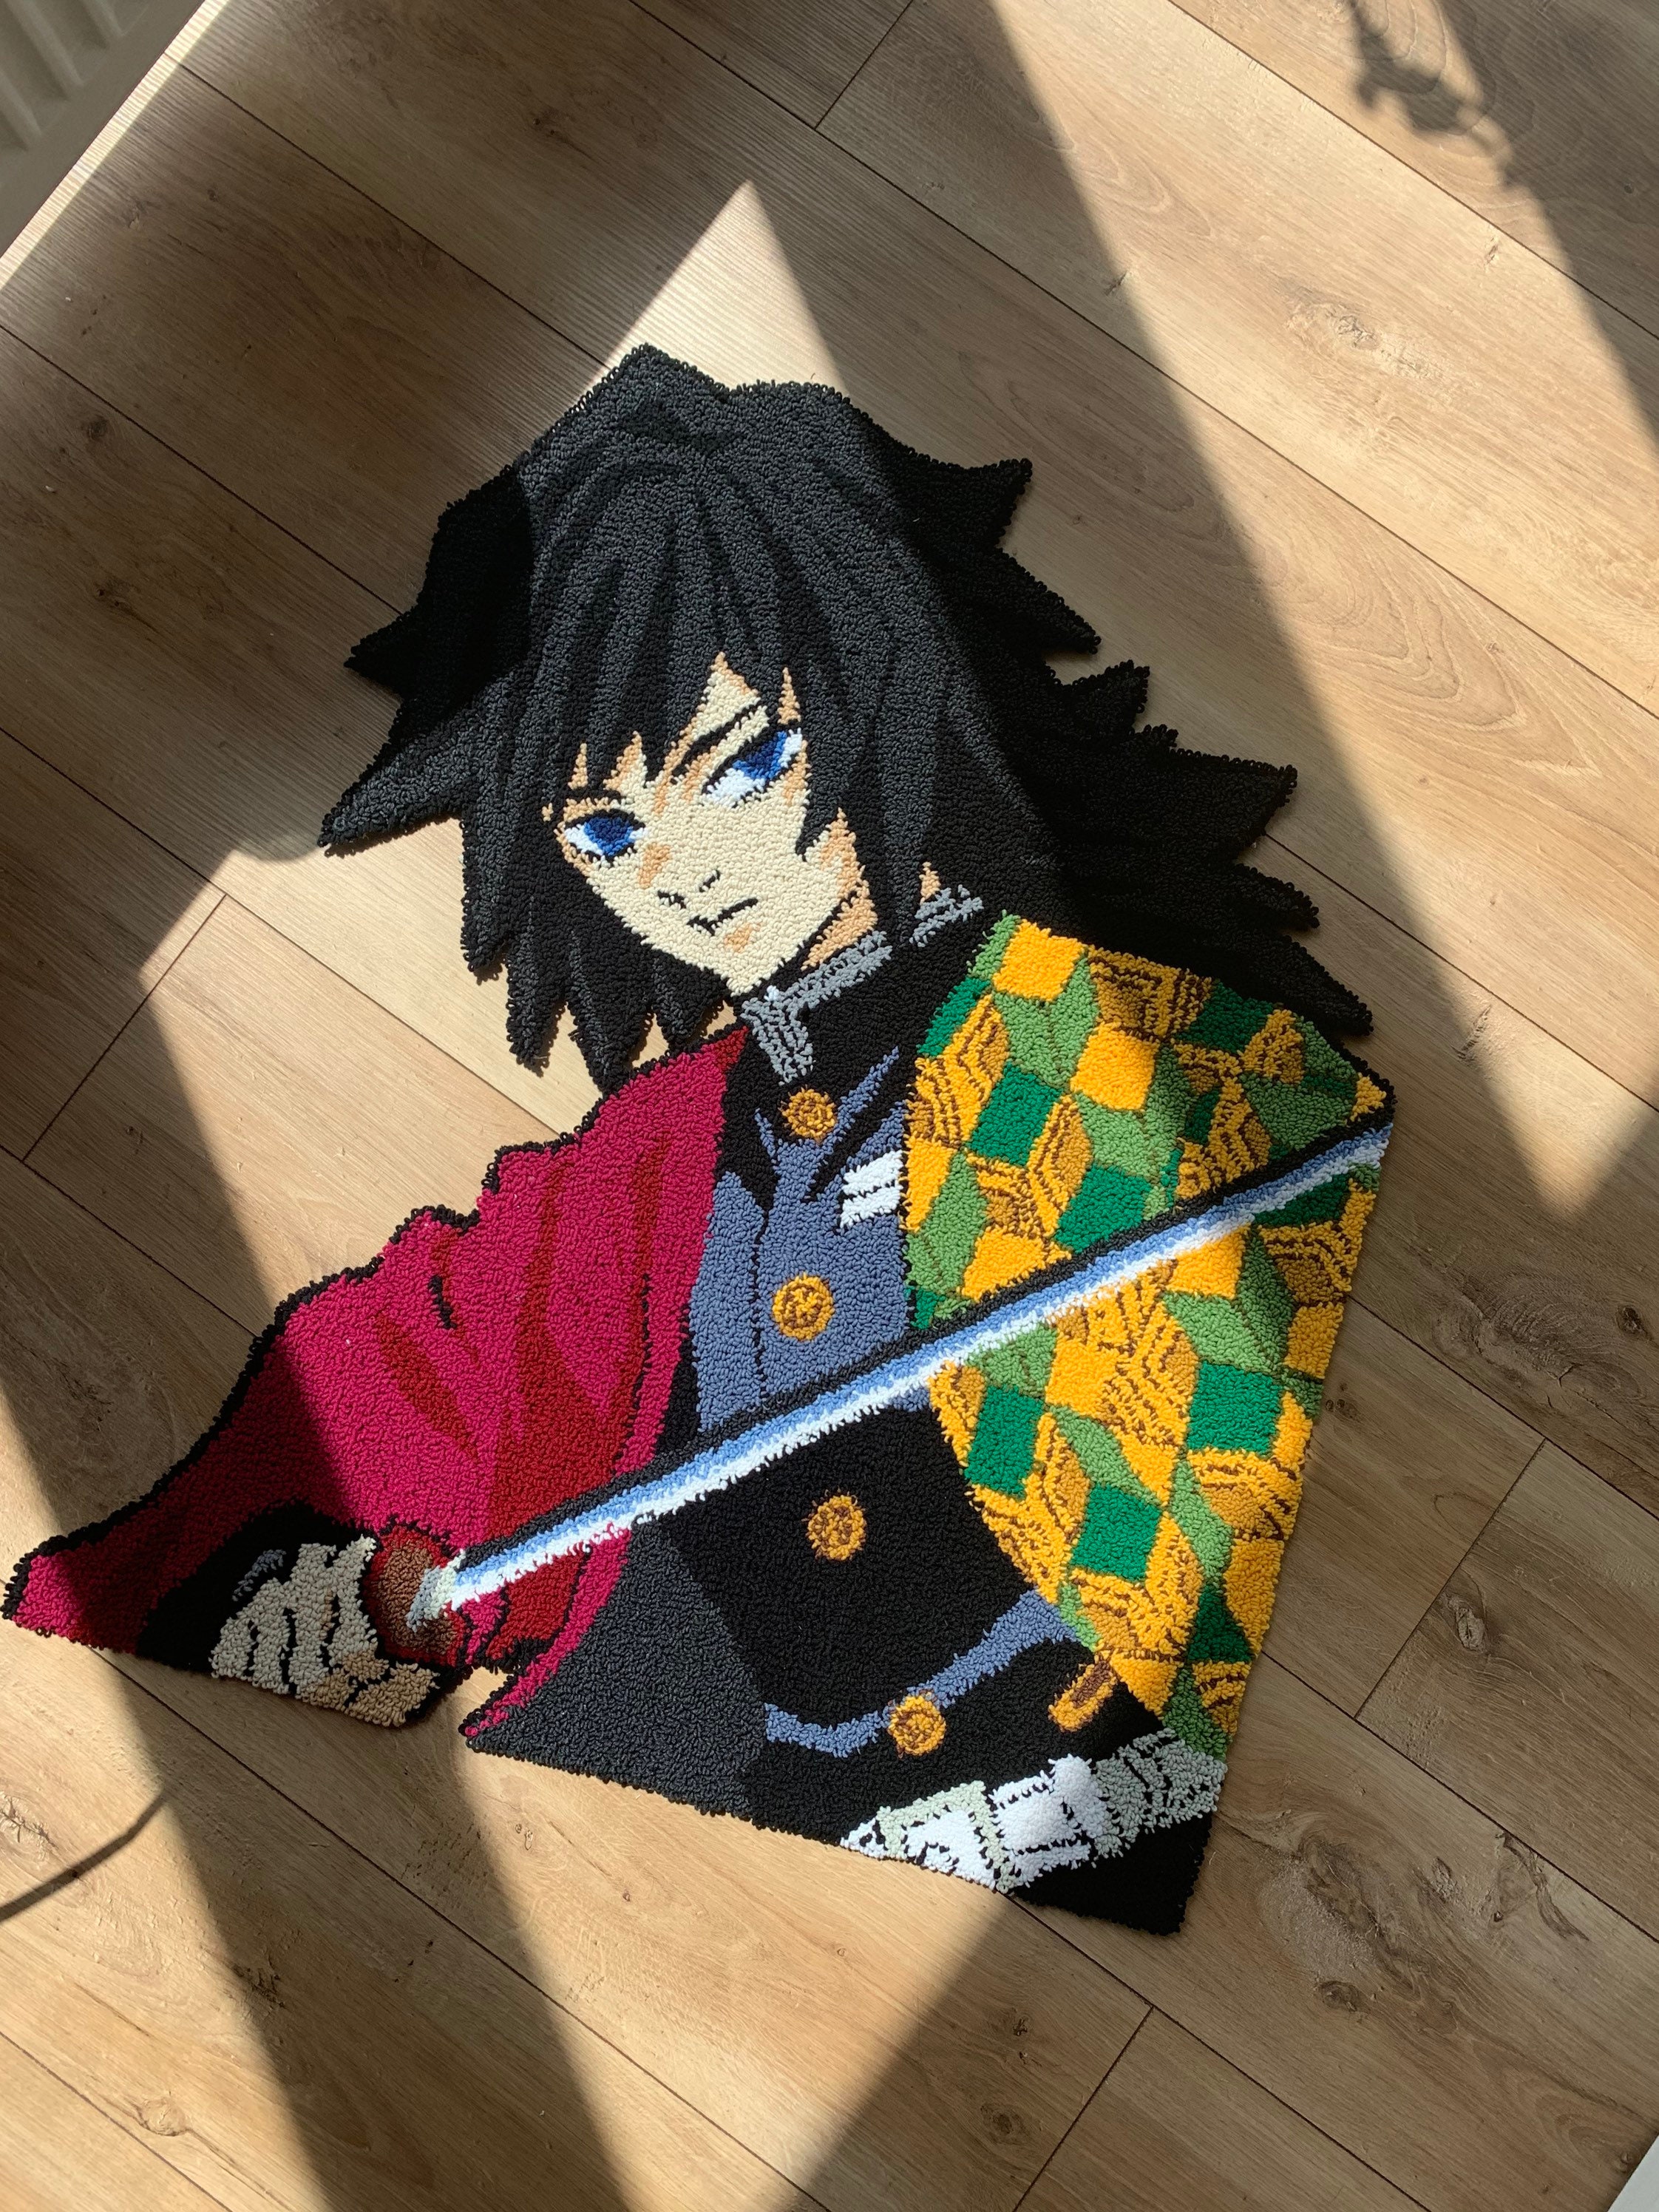 Get Lost In The World Of Anime With Our Large Anime Rug - Diipoo